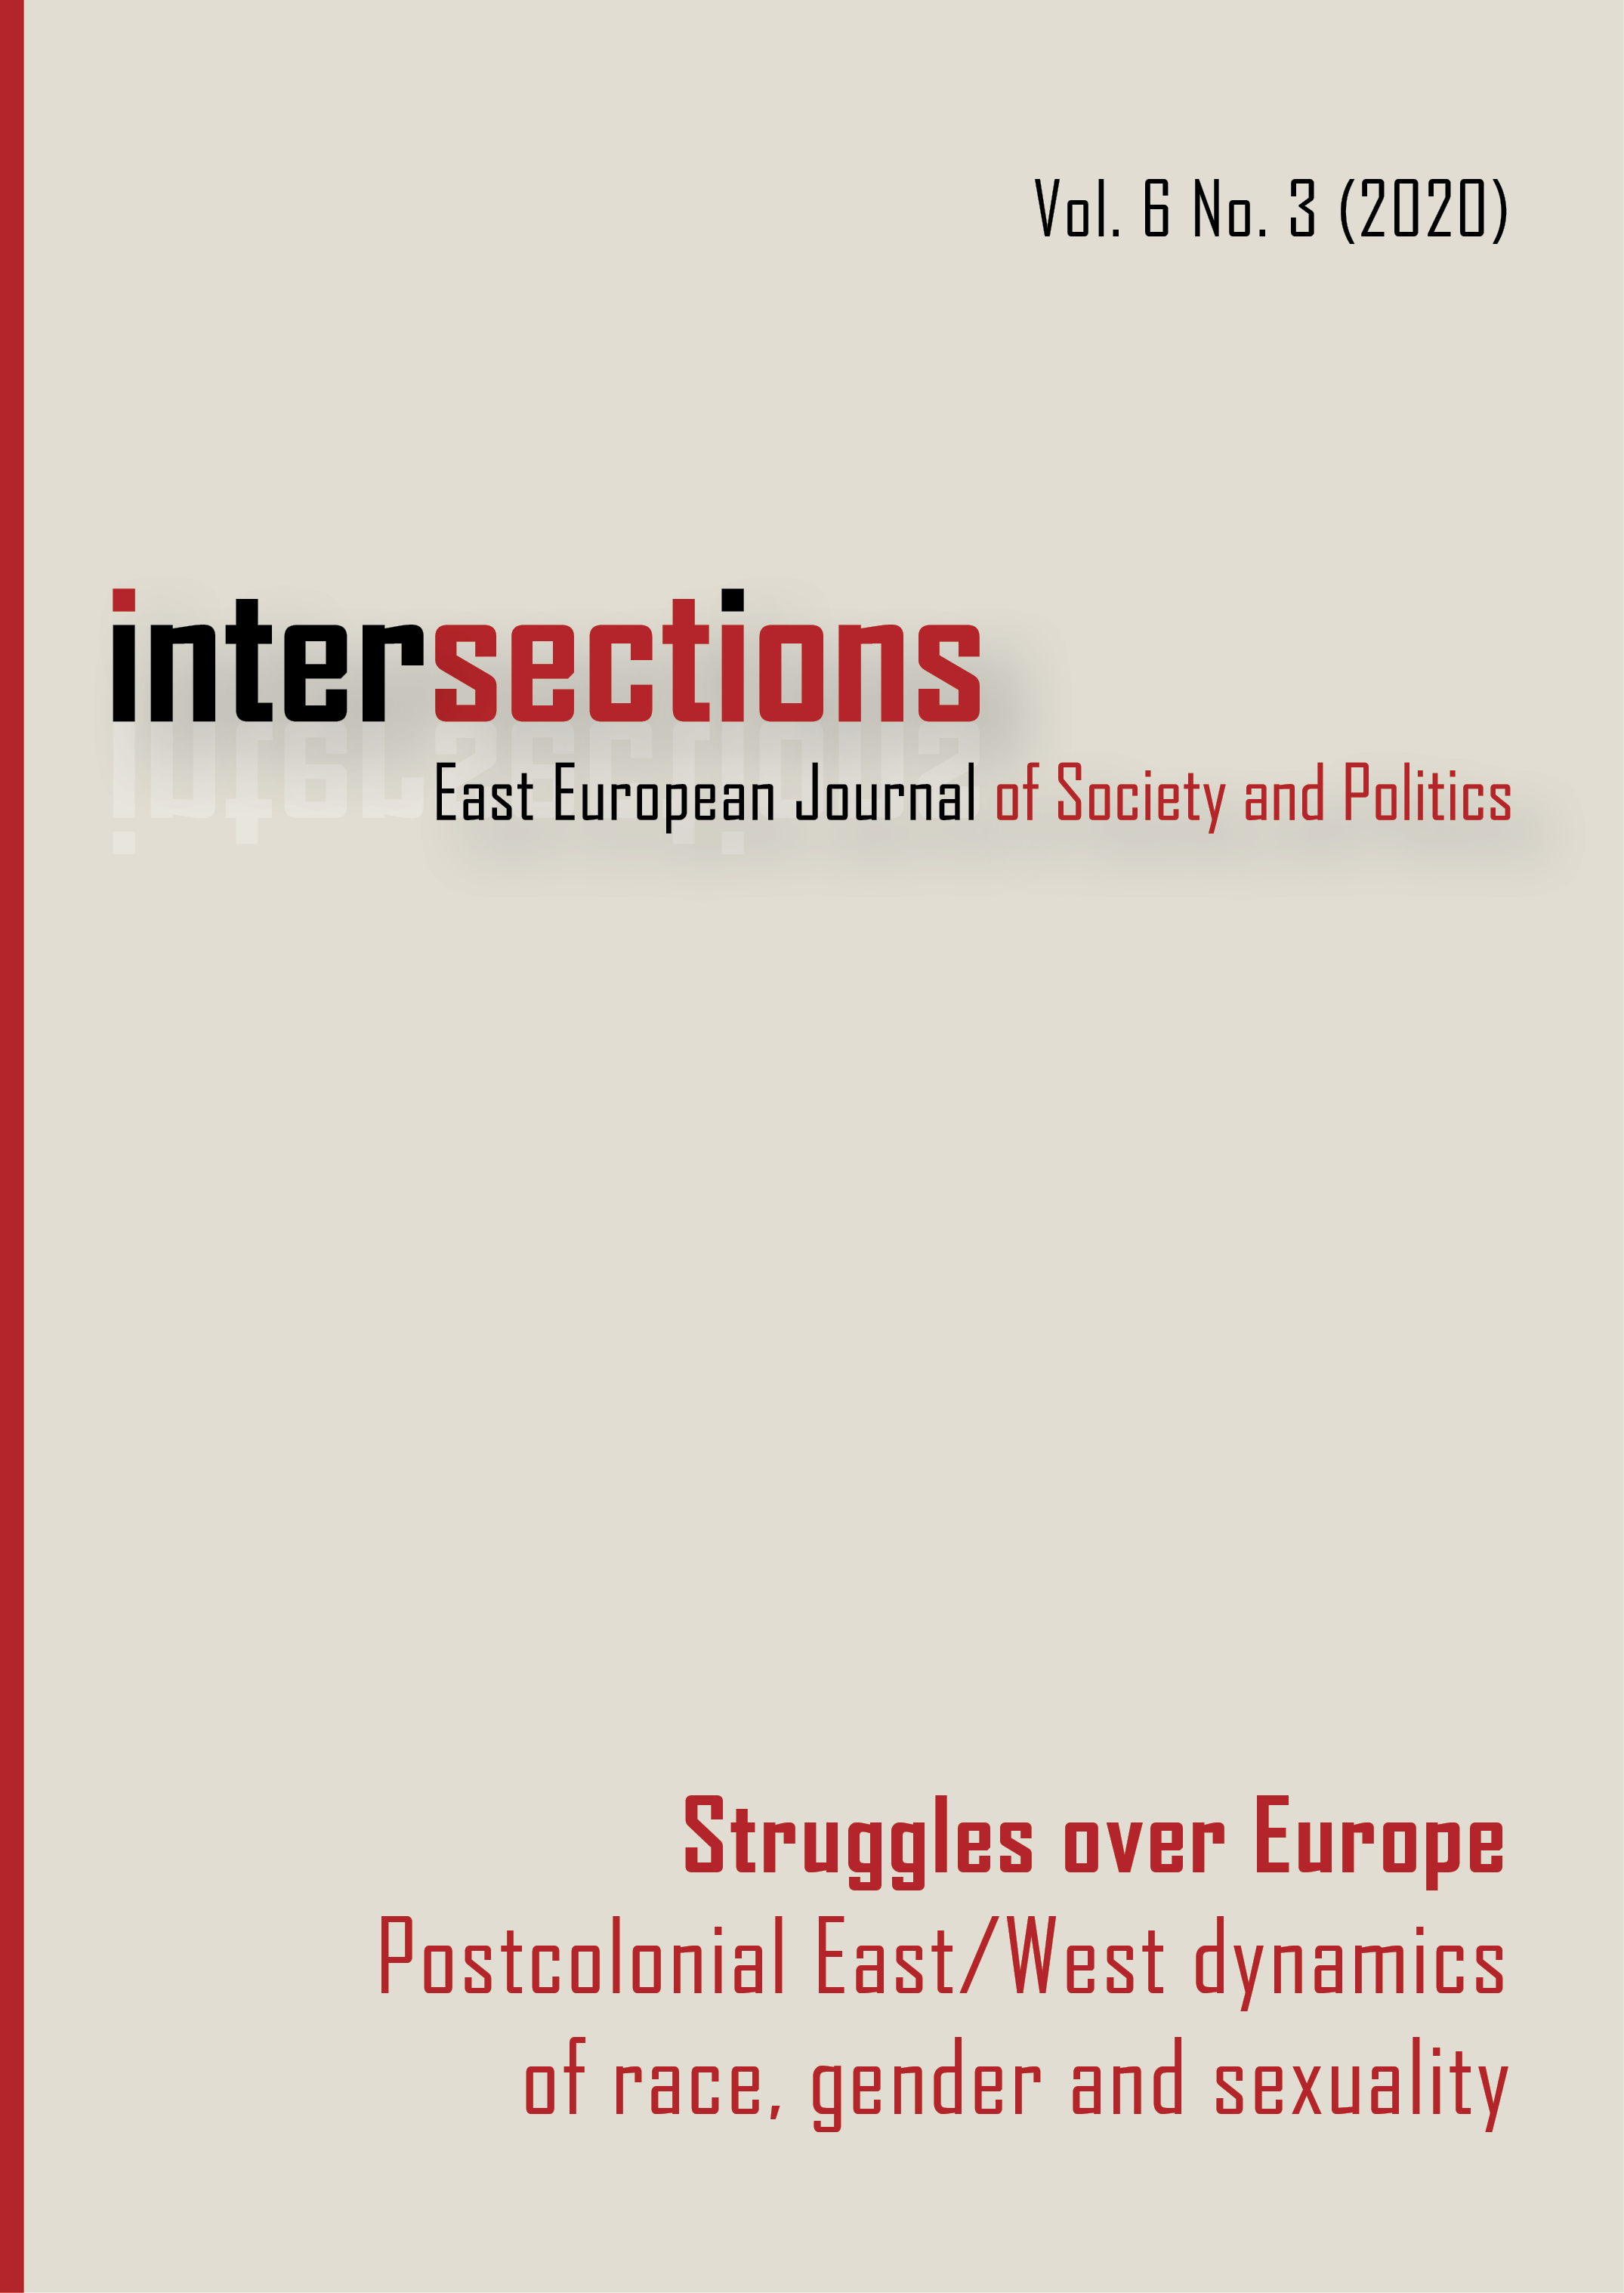 					View Vol. 6 No. 3 (2020): Struggles over Europe: Postcolonial East/West Dynamics of Race, Gender and Sexuality
				